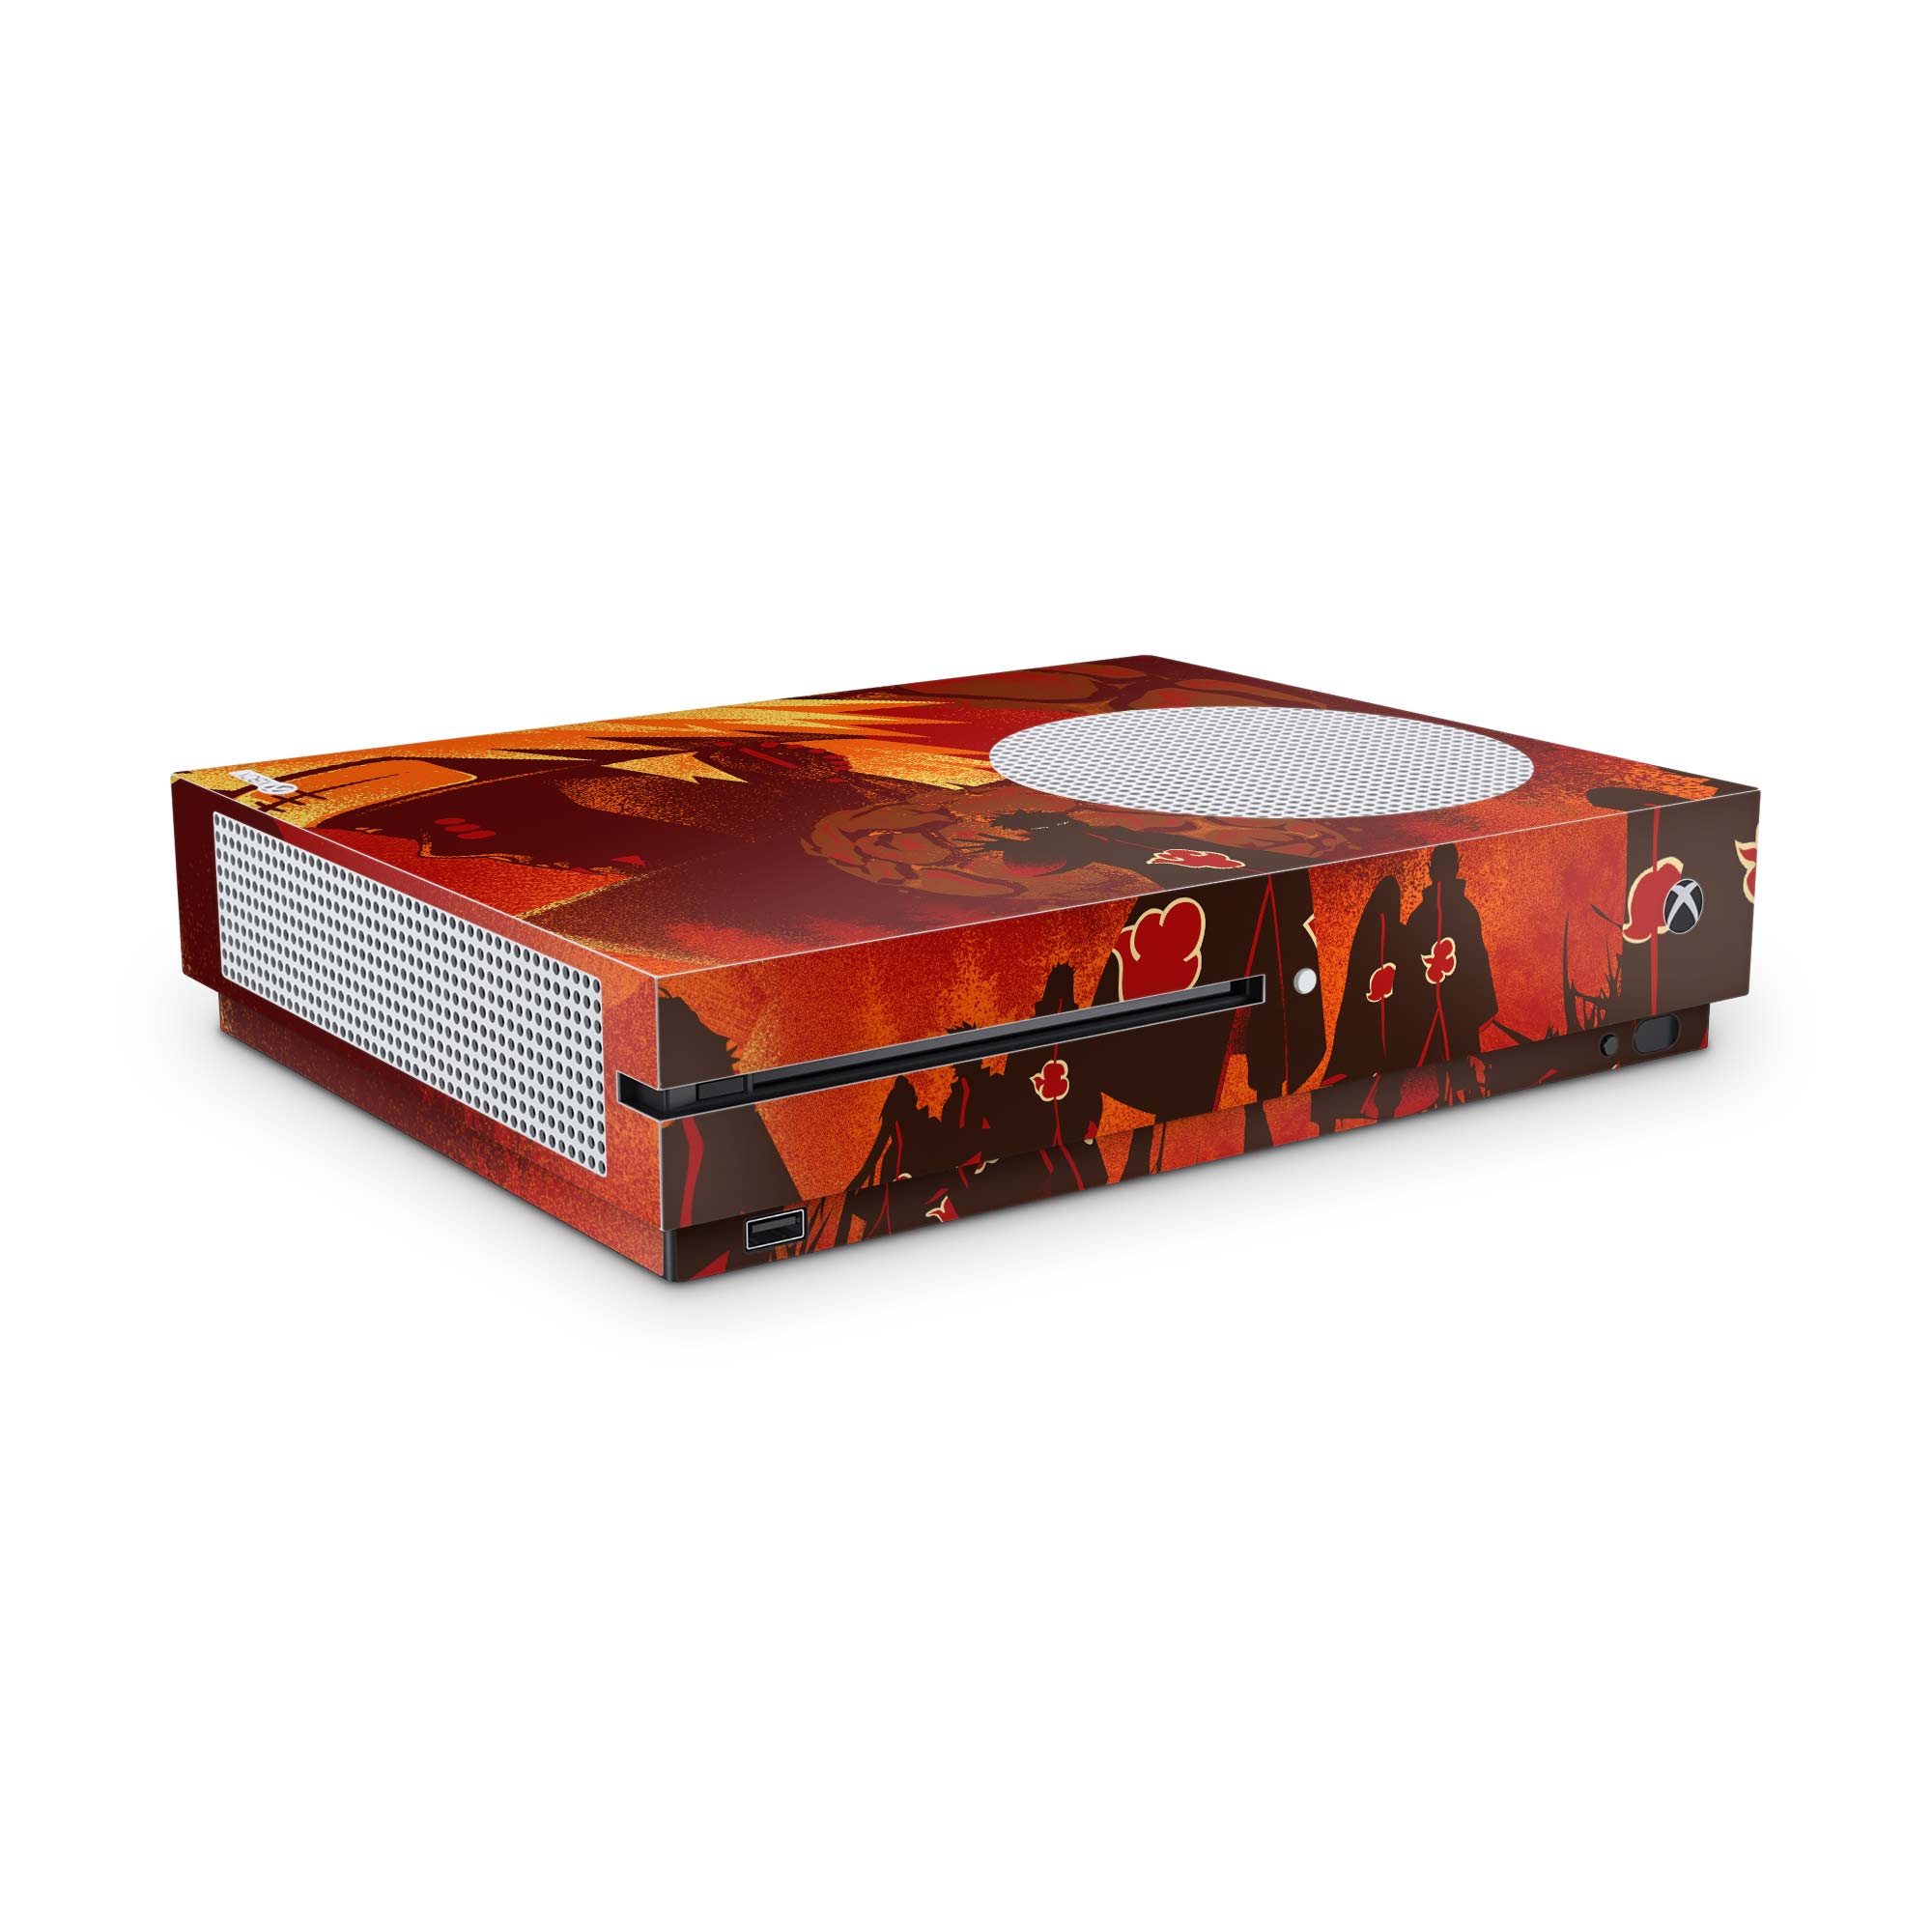 Six Paths of Pain - Xbox One S Console Skin